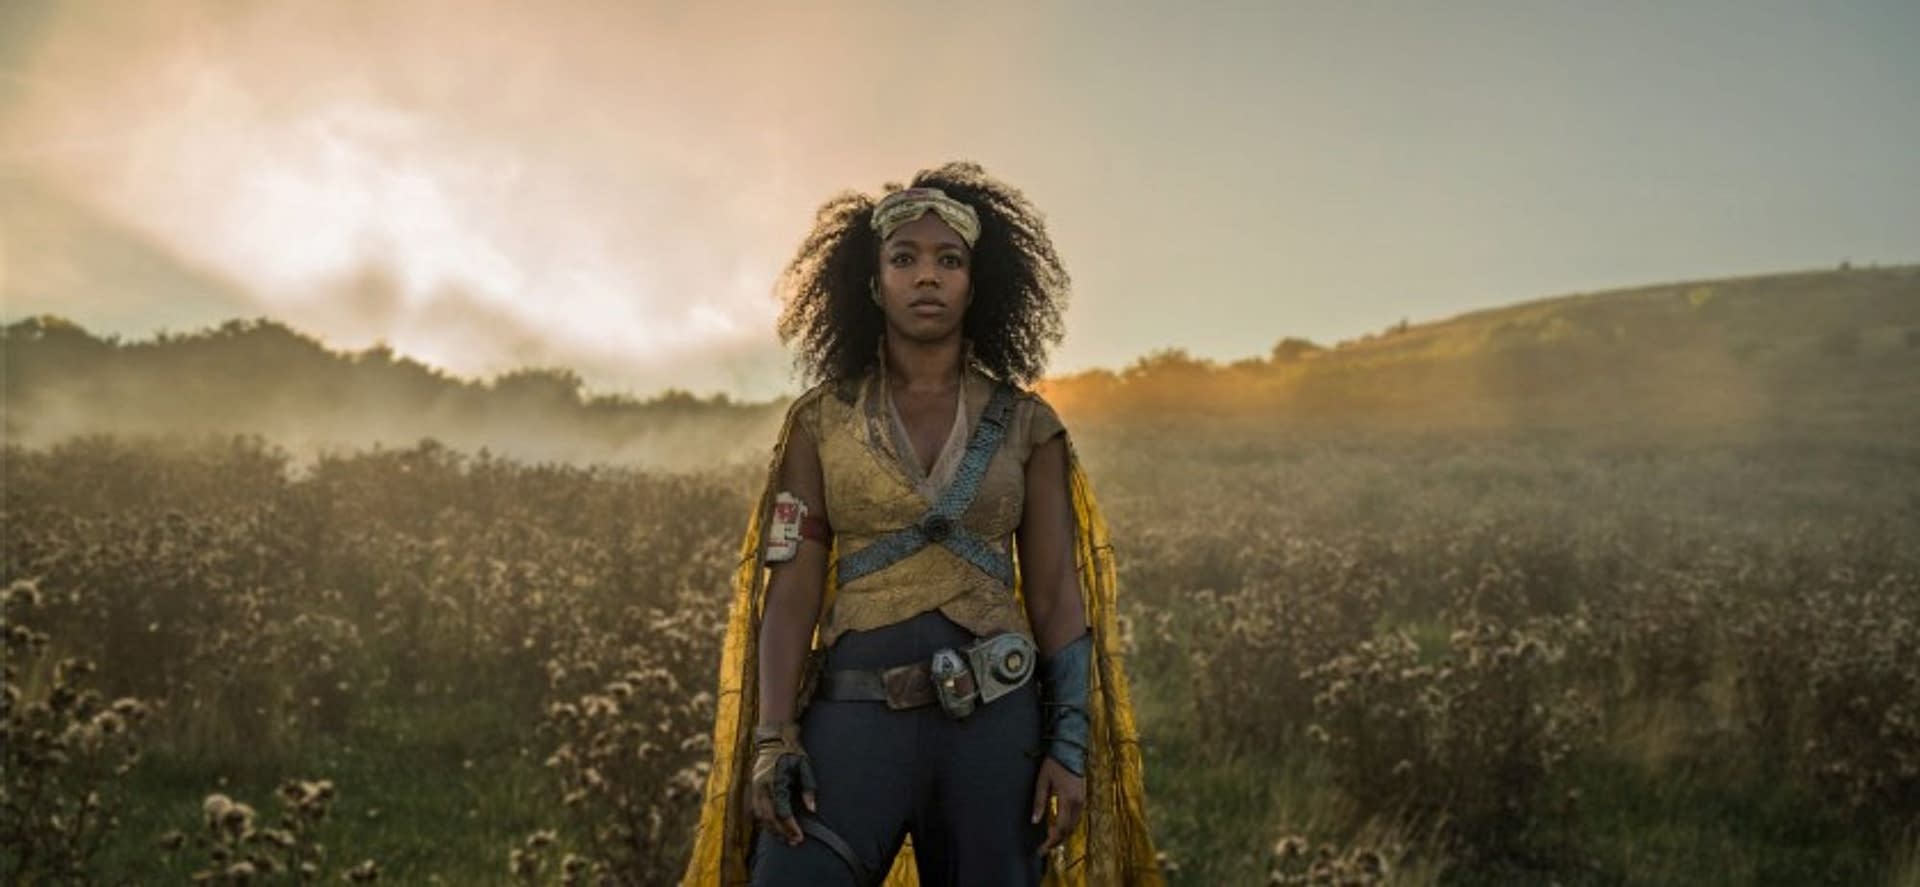 Naomi Ackie Talks Getting Offered a Role in "Star Wars: The Rise of Skywalker"